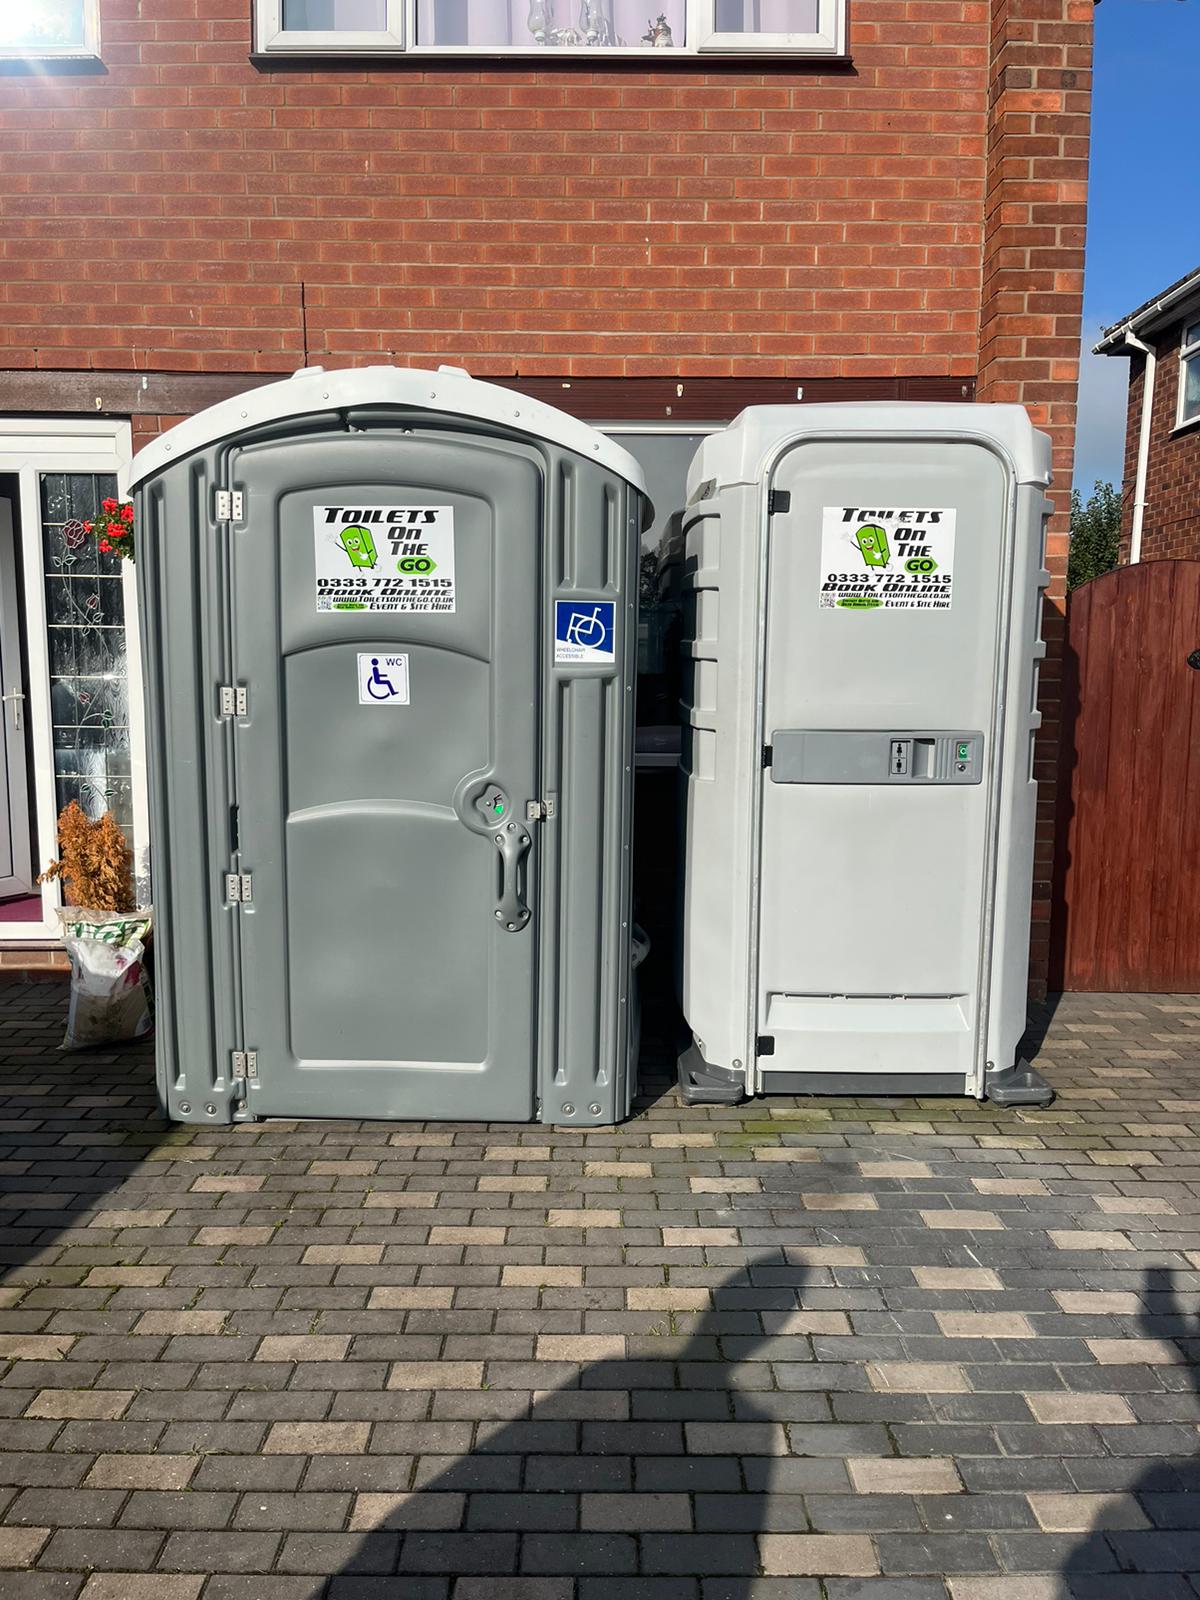 Gallery | Portable Toilet Loo Hire Rental Company in North West uk and Manchester gallery image 60